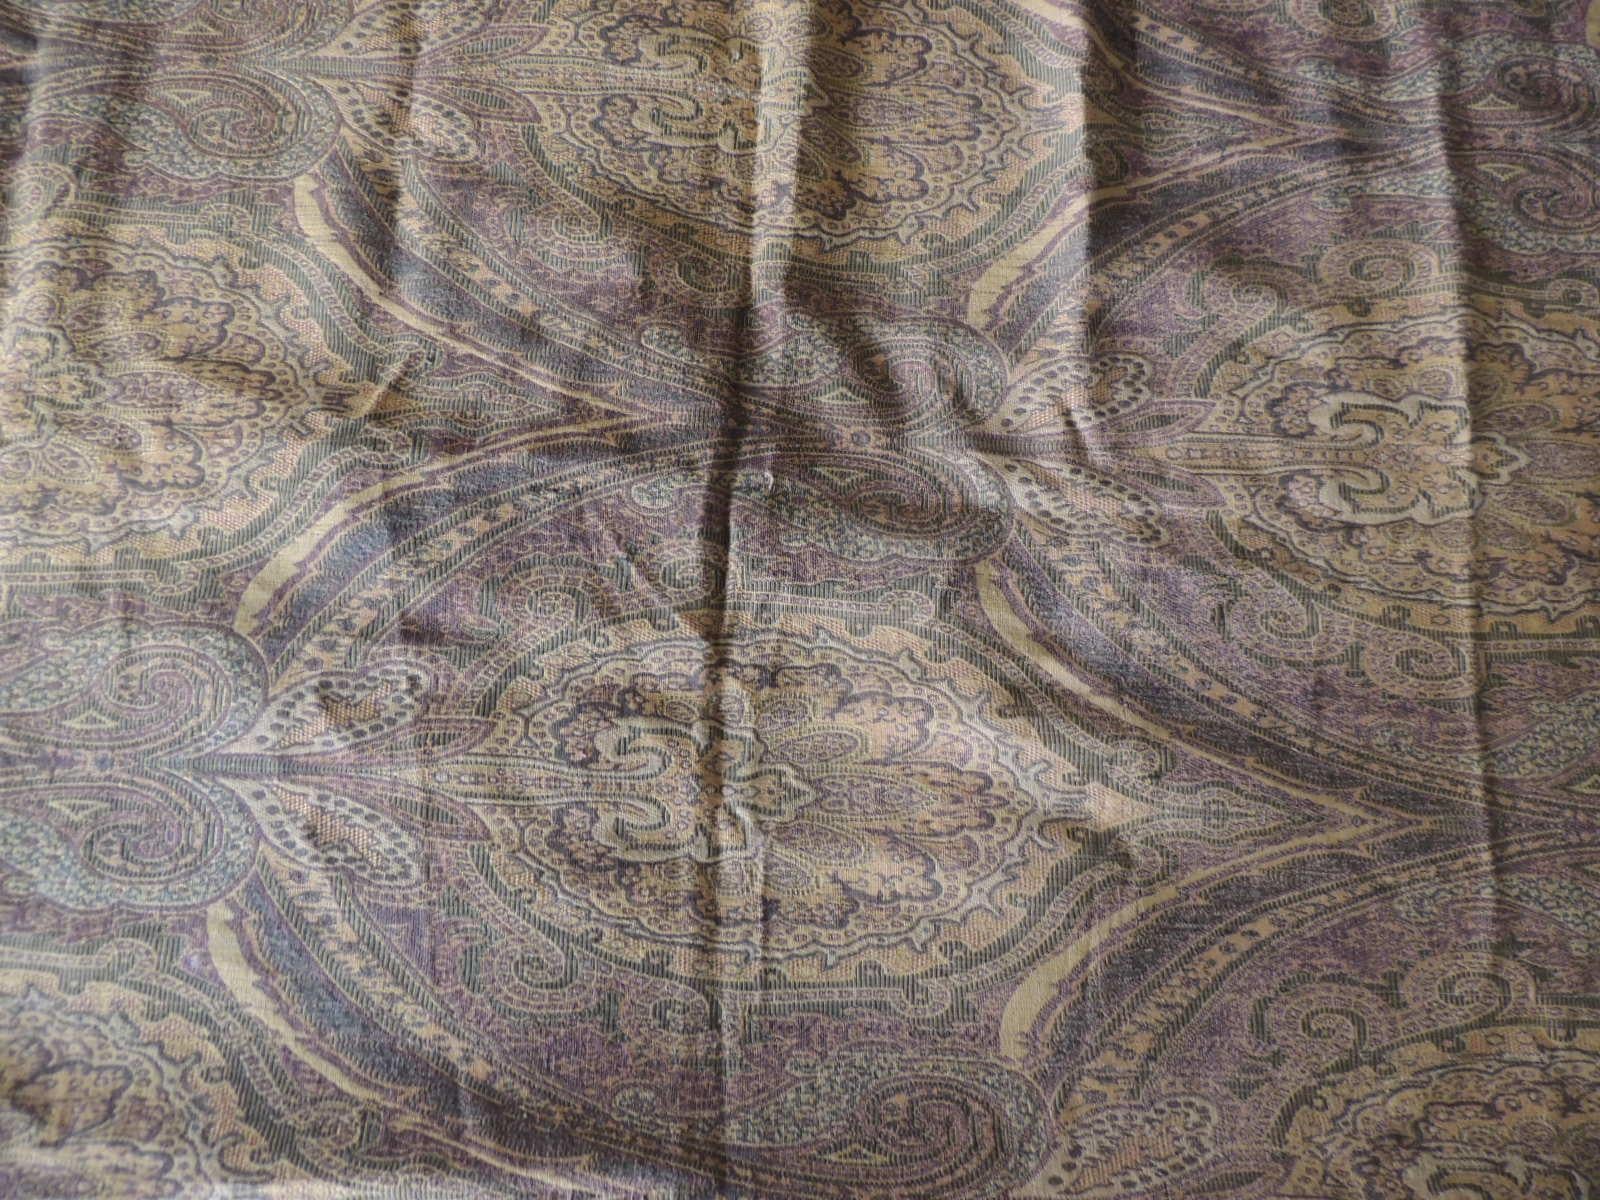 Yellow Woven Cotton Paisley Throw with Fringes In Good Condition For Sale In Oakland Park, FL